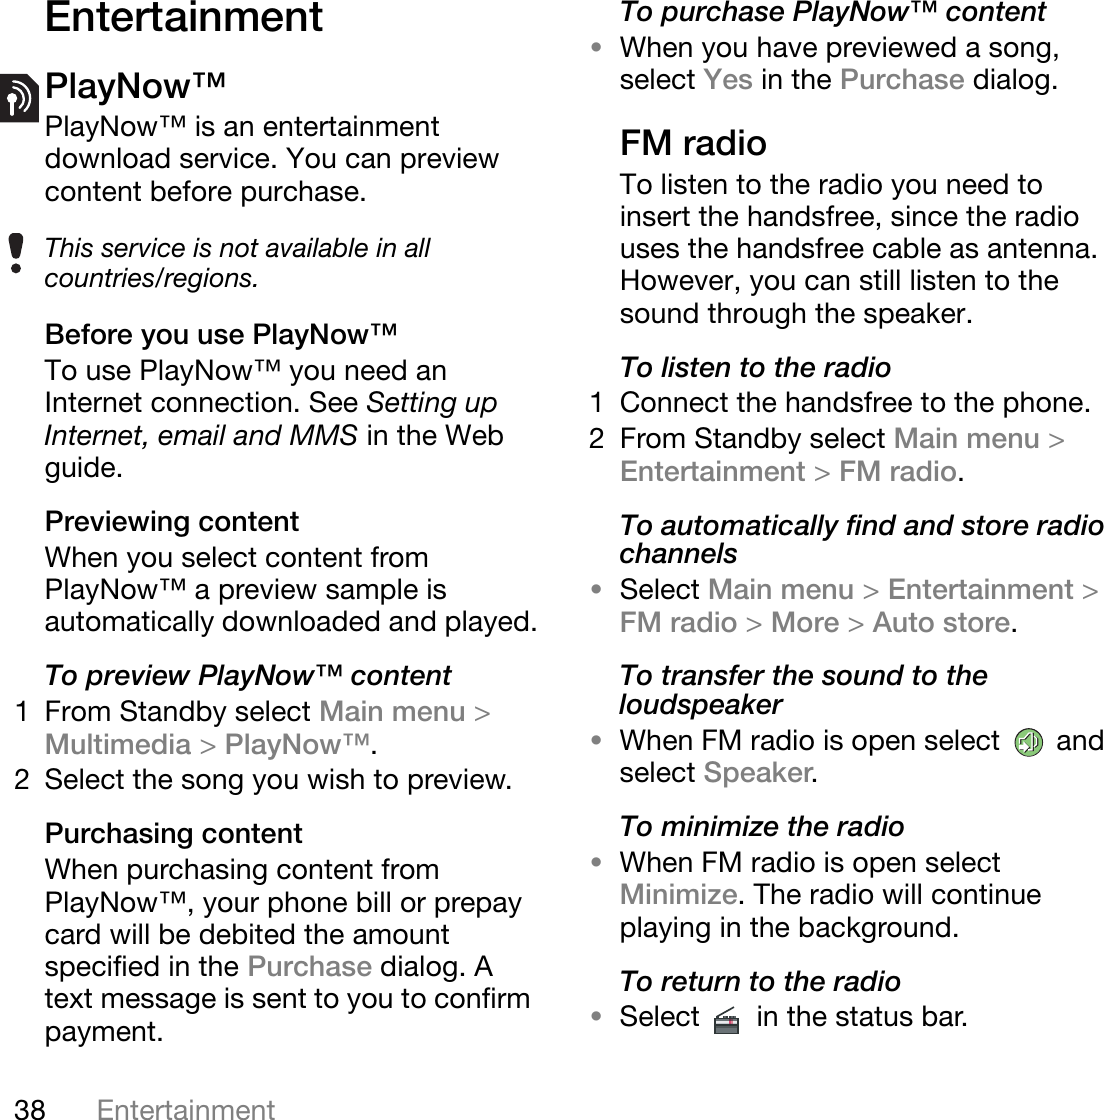 38 EntertainmentThis is the Internet version of the user&apos;s guide. © Print only for private use.EntertainmentPlayNow™PlayNow™ is an entertainment download service. You can preview content before purchase. Before you use PlayNow™To use PlayNow™ you need an Internet connection. See Setting up Internet, email and MMS in the Web guide.Previewing contentWhen you select content from PlayNow™ a preview sample is automatically downloaded and played.To preview PlayNow™ content1 From Standby select Main menu &gt;Multimedia &gt;PlayNow™.2 Select the song you wish to preview. Purchasing contentWhen purchasing content from PlayNow™, your phone bill or prepay card will be debited the amount specified in the Purchase dialog. A text message is sent to you to confirm payment.To purchase PlayNow™ content•When you have previewed a song, select Yes in the Purchase dialog.FM radioTo listen to the radio you need to insert the handsfree, since the radio uses the handsfree cable as antenna. However, you can still listen to the sound through the speaker.To listen to the radio1 Connect the handsfree to the phone.2 From Standby select Main menu &gt;Entertainment &gt;FM radio.To automatically find and store radio channels•Select Main menu &gt;Entertainment &gt;FM radio &gt;More &gt;Auto store.To transfer the sound to the loudspeaker•When FM radio is open select   and select Speaker.To minimize the radio•When FM radio is open select Minimize. The radio will continue playing in the background.To return to the radio•Select   in the status bar.This service is not available in all countries/regions.